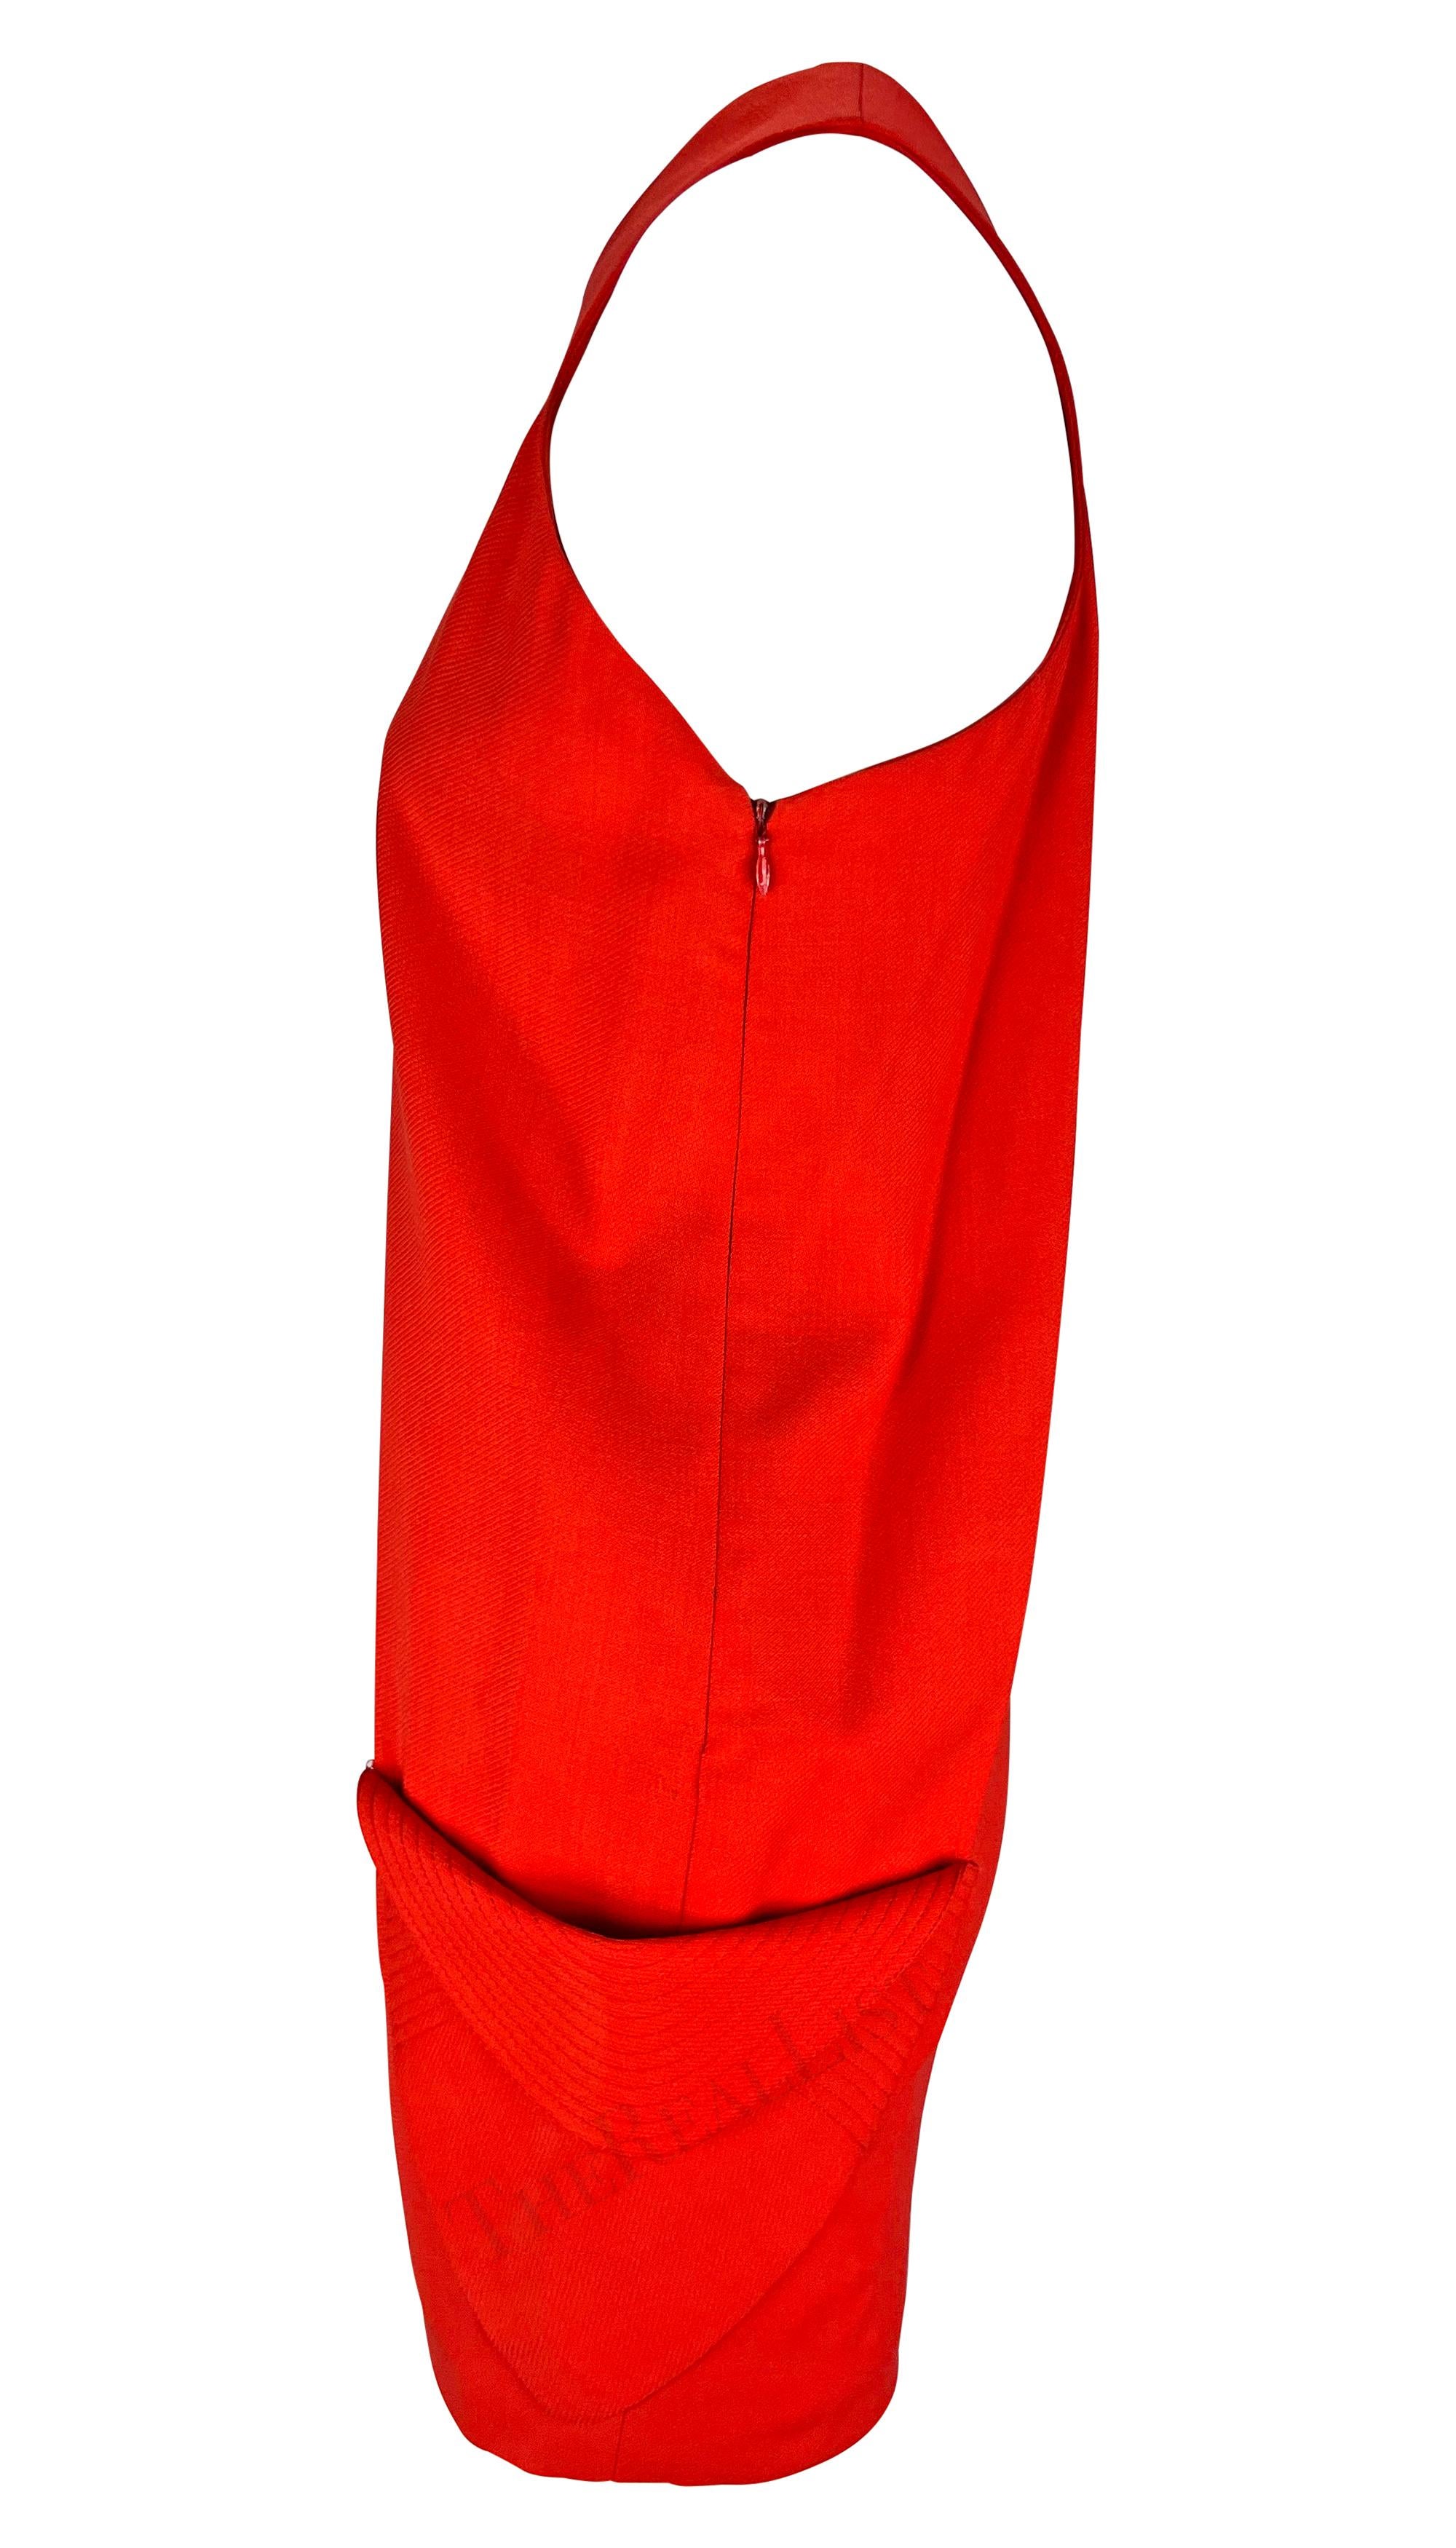 S/S 1991 Gianni Versace Runway Ad Red Sleeveless Pocket Mini Shift Dress For Sale 2